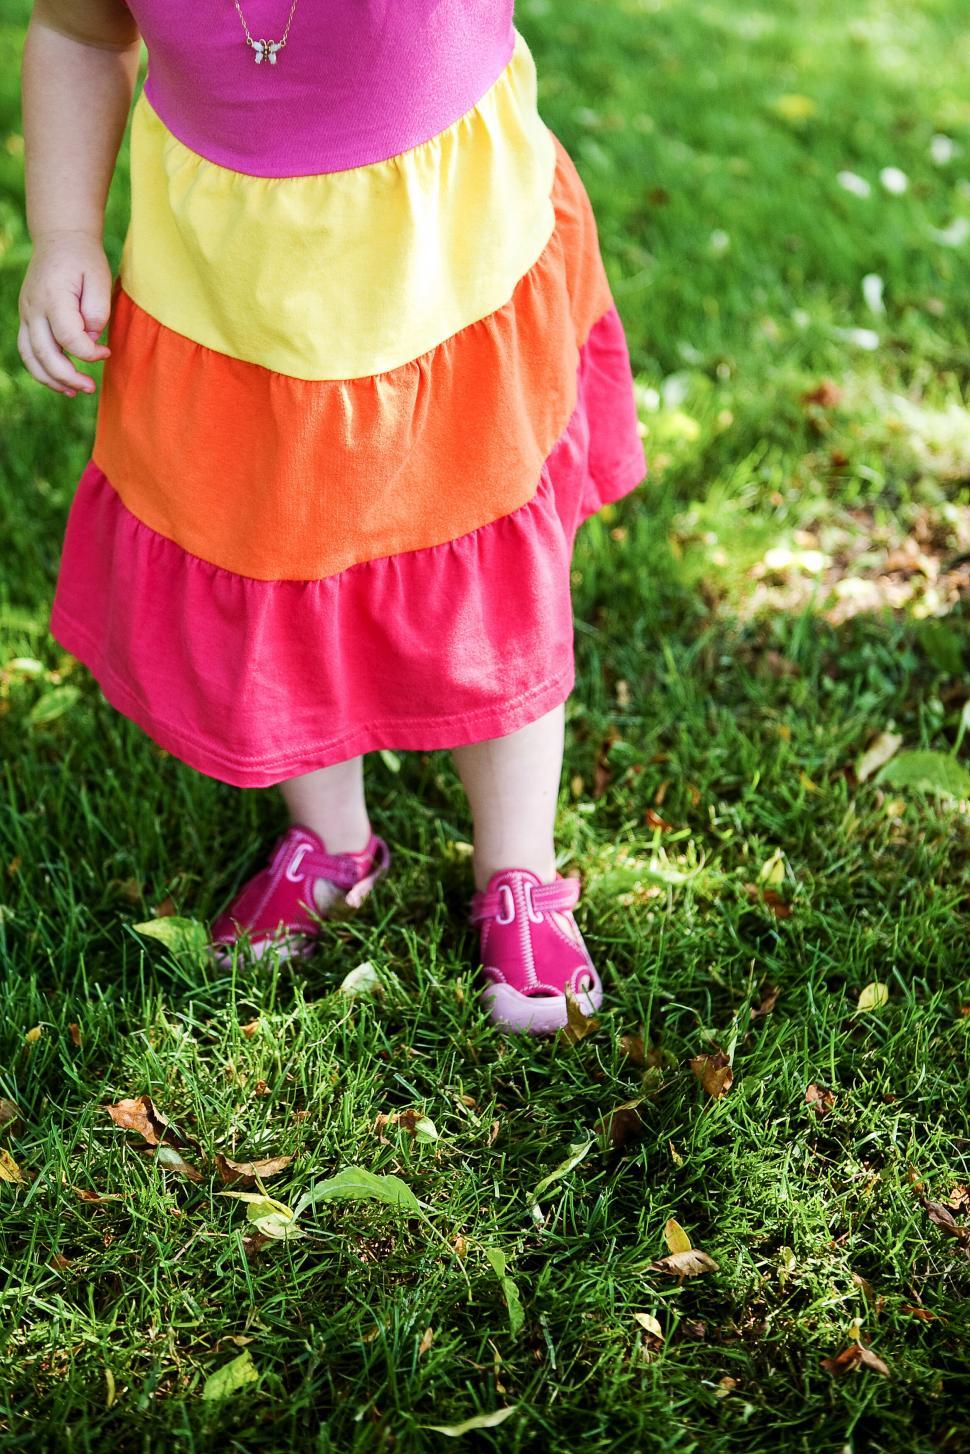 Free Image of Toddler in a multicolor dress on grass 